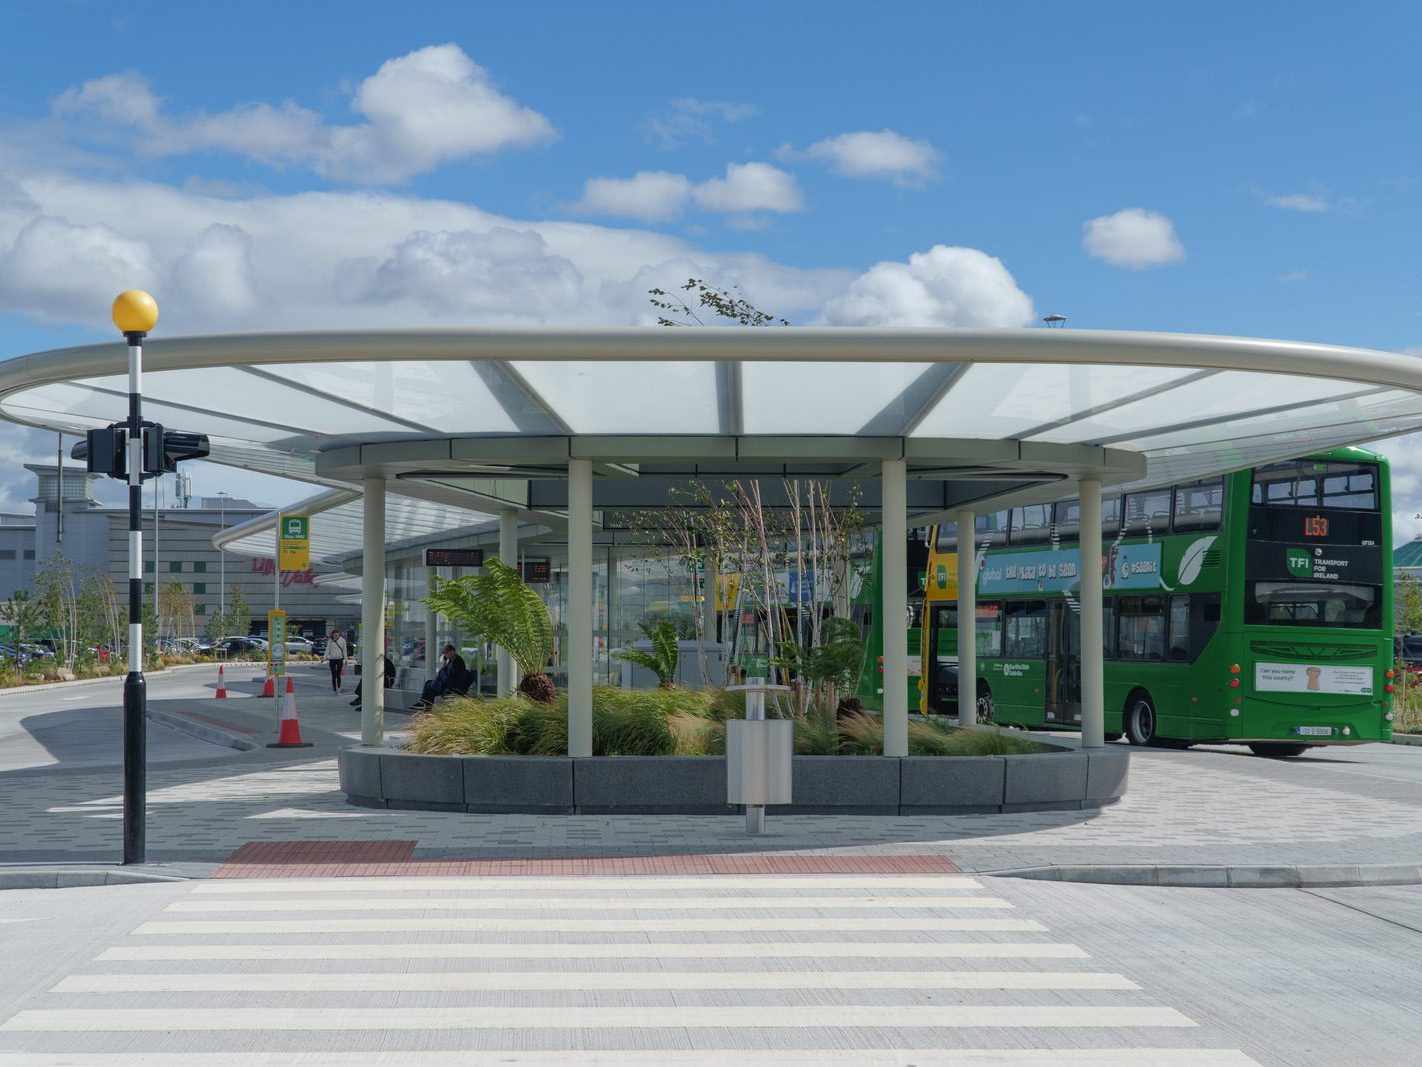 THE NEW BUS PLAZA THAT I DID NOT KNOW ABOUT [AT LIFFEY VALLEY SHOPPING CENTRE] 009